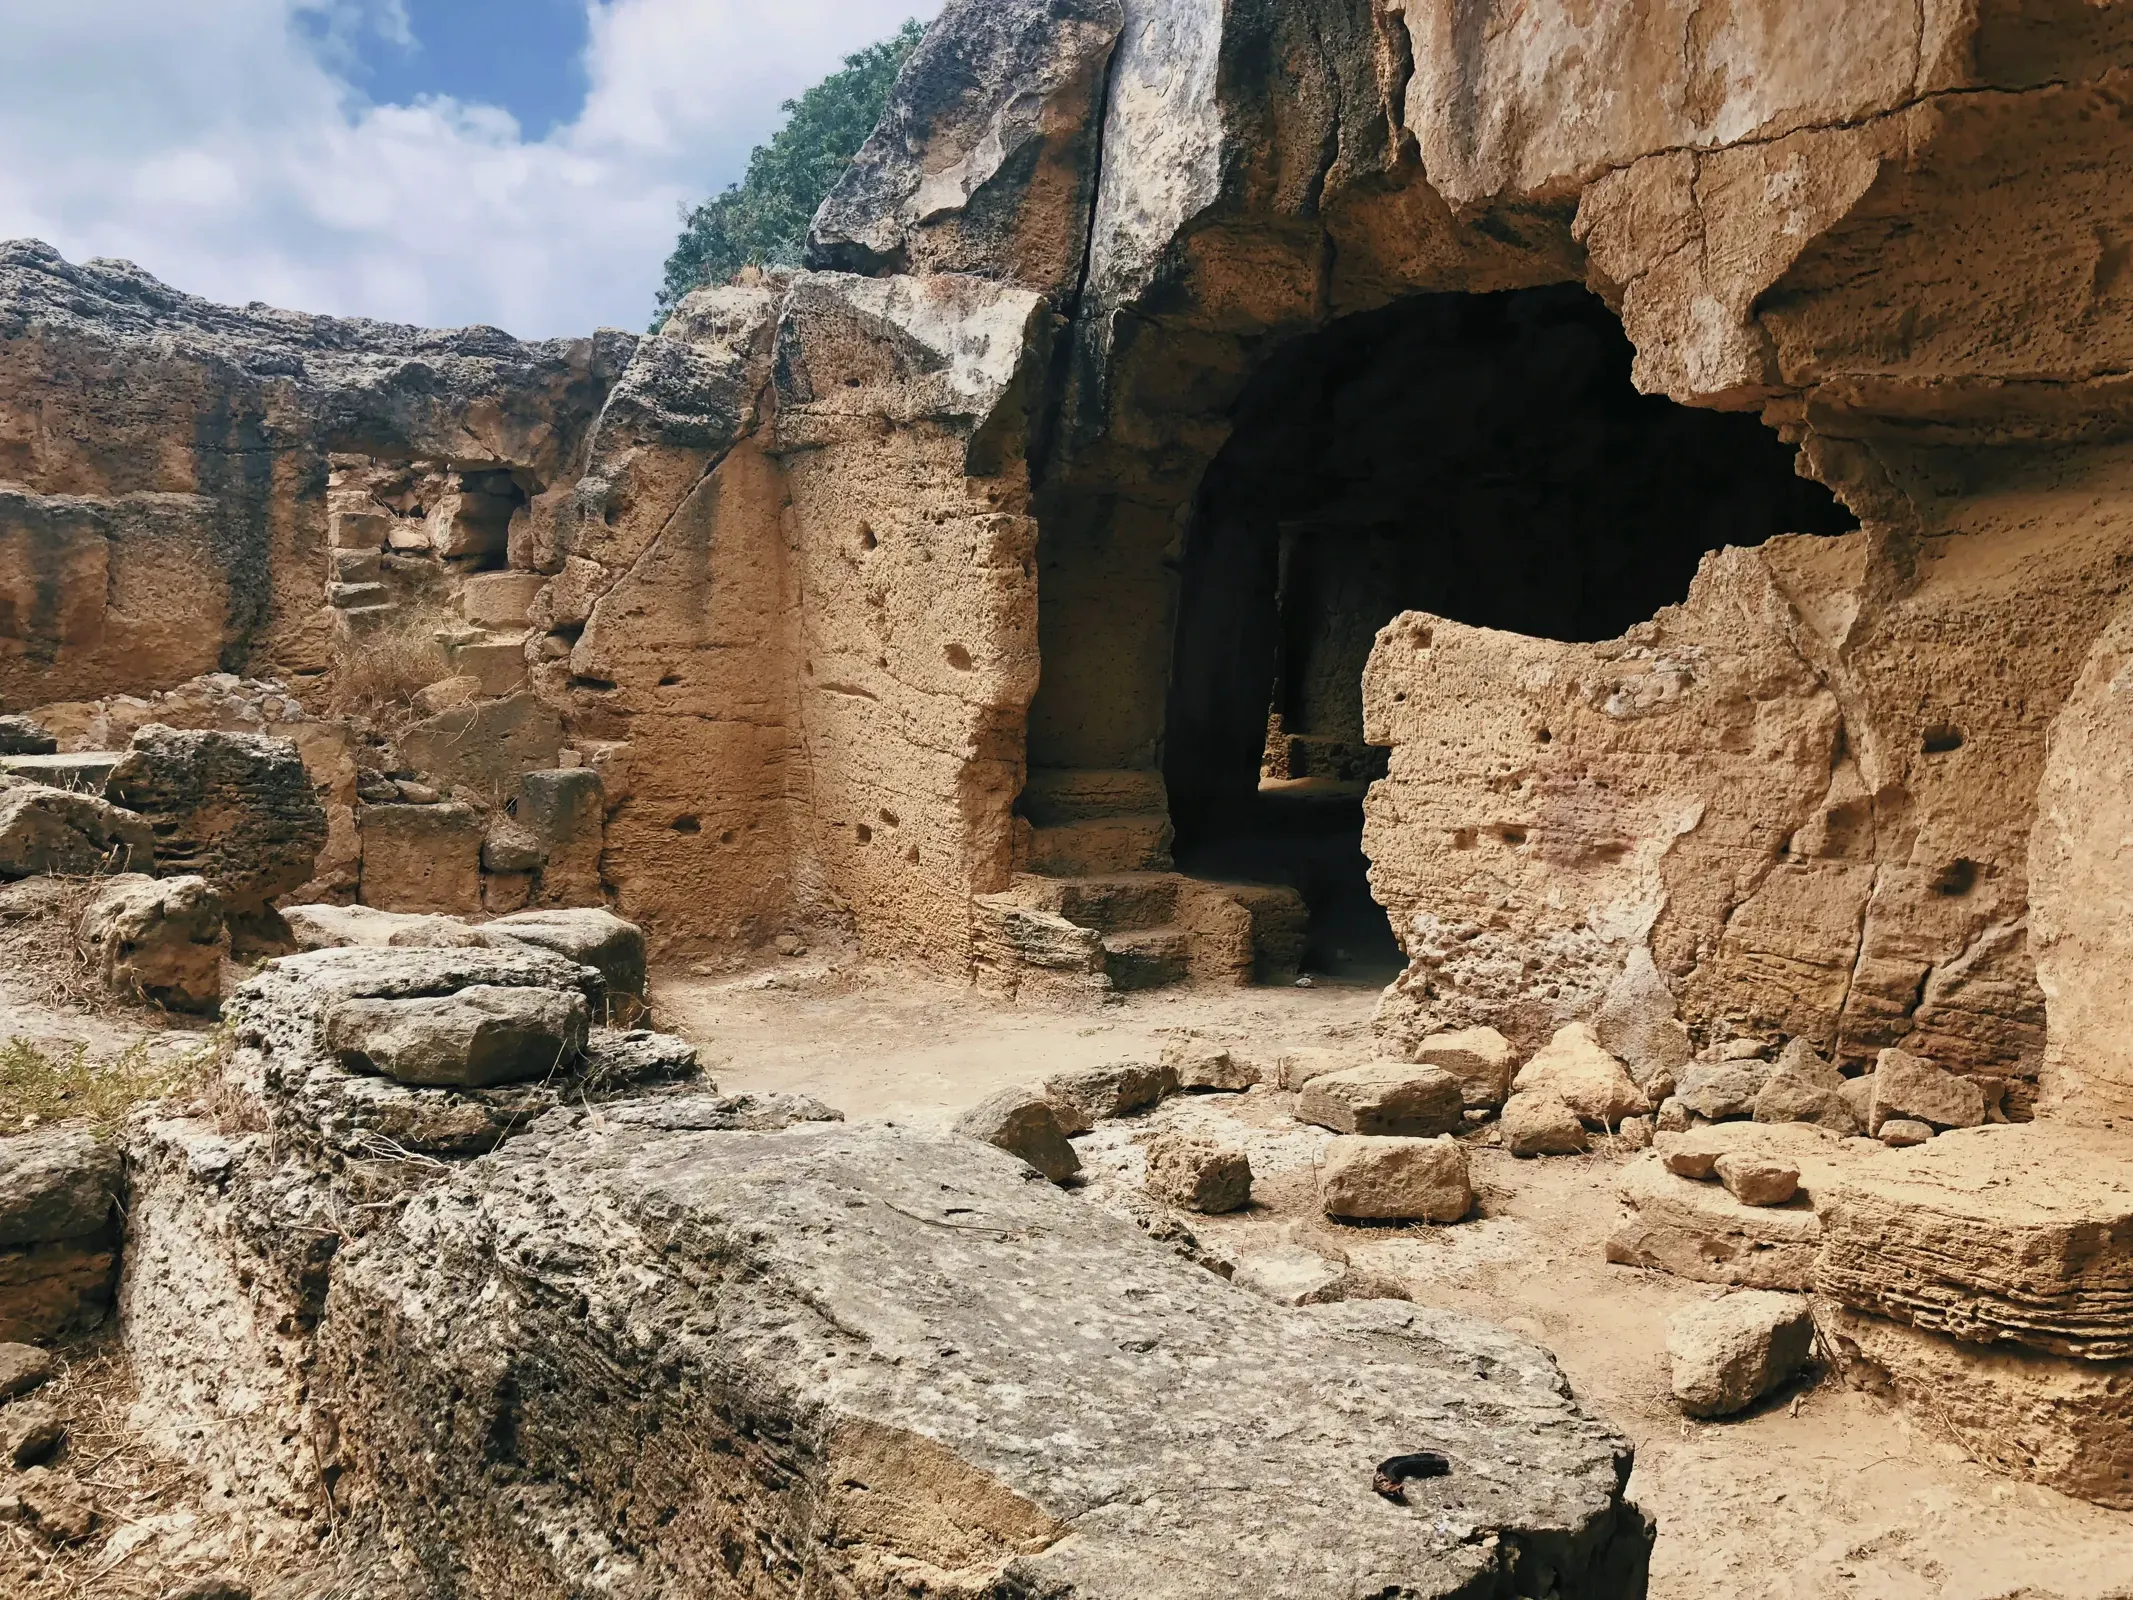 Massive rock structure with a distinctive hole resembling a window or entryway.